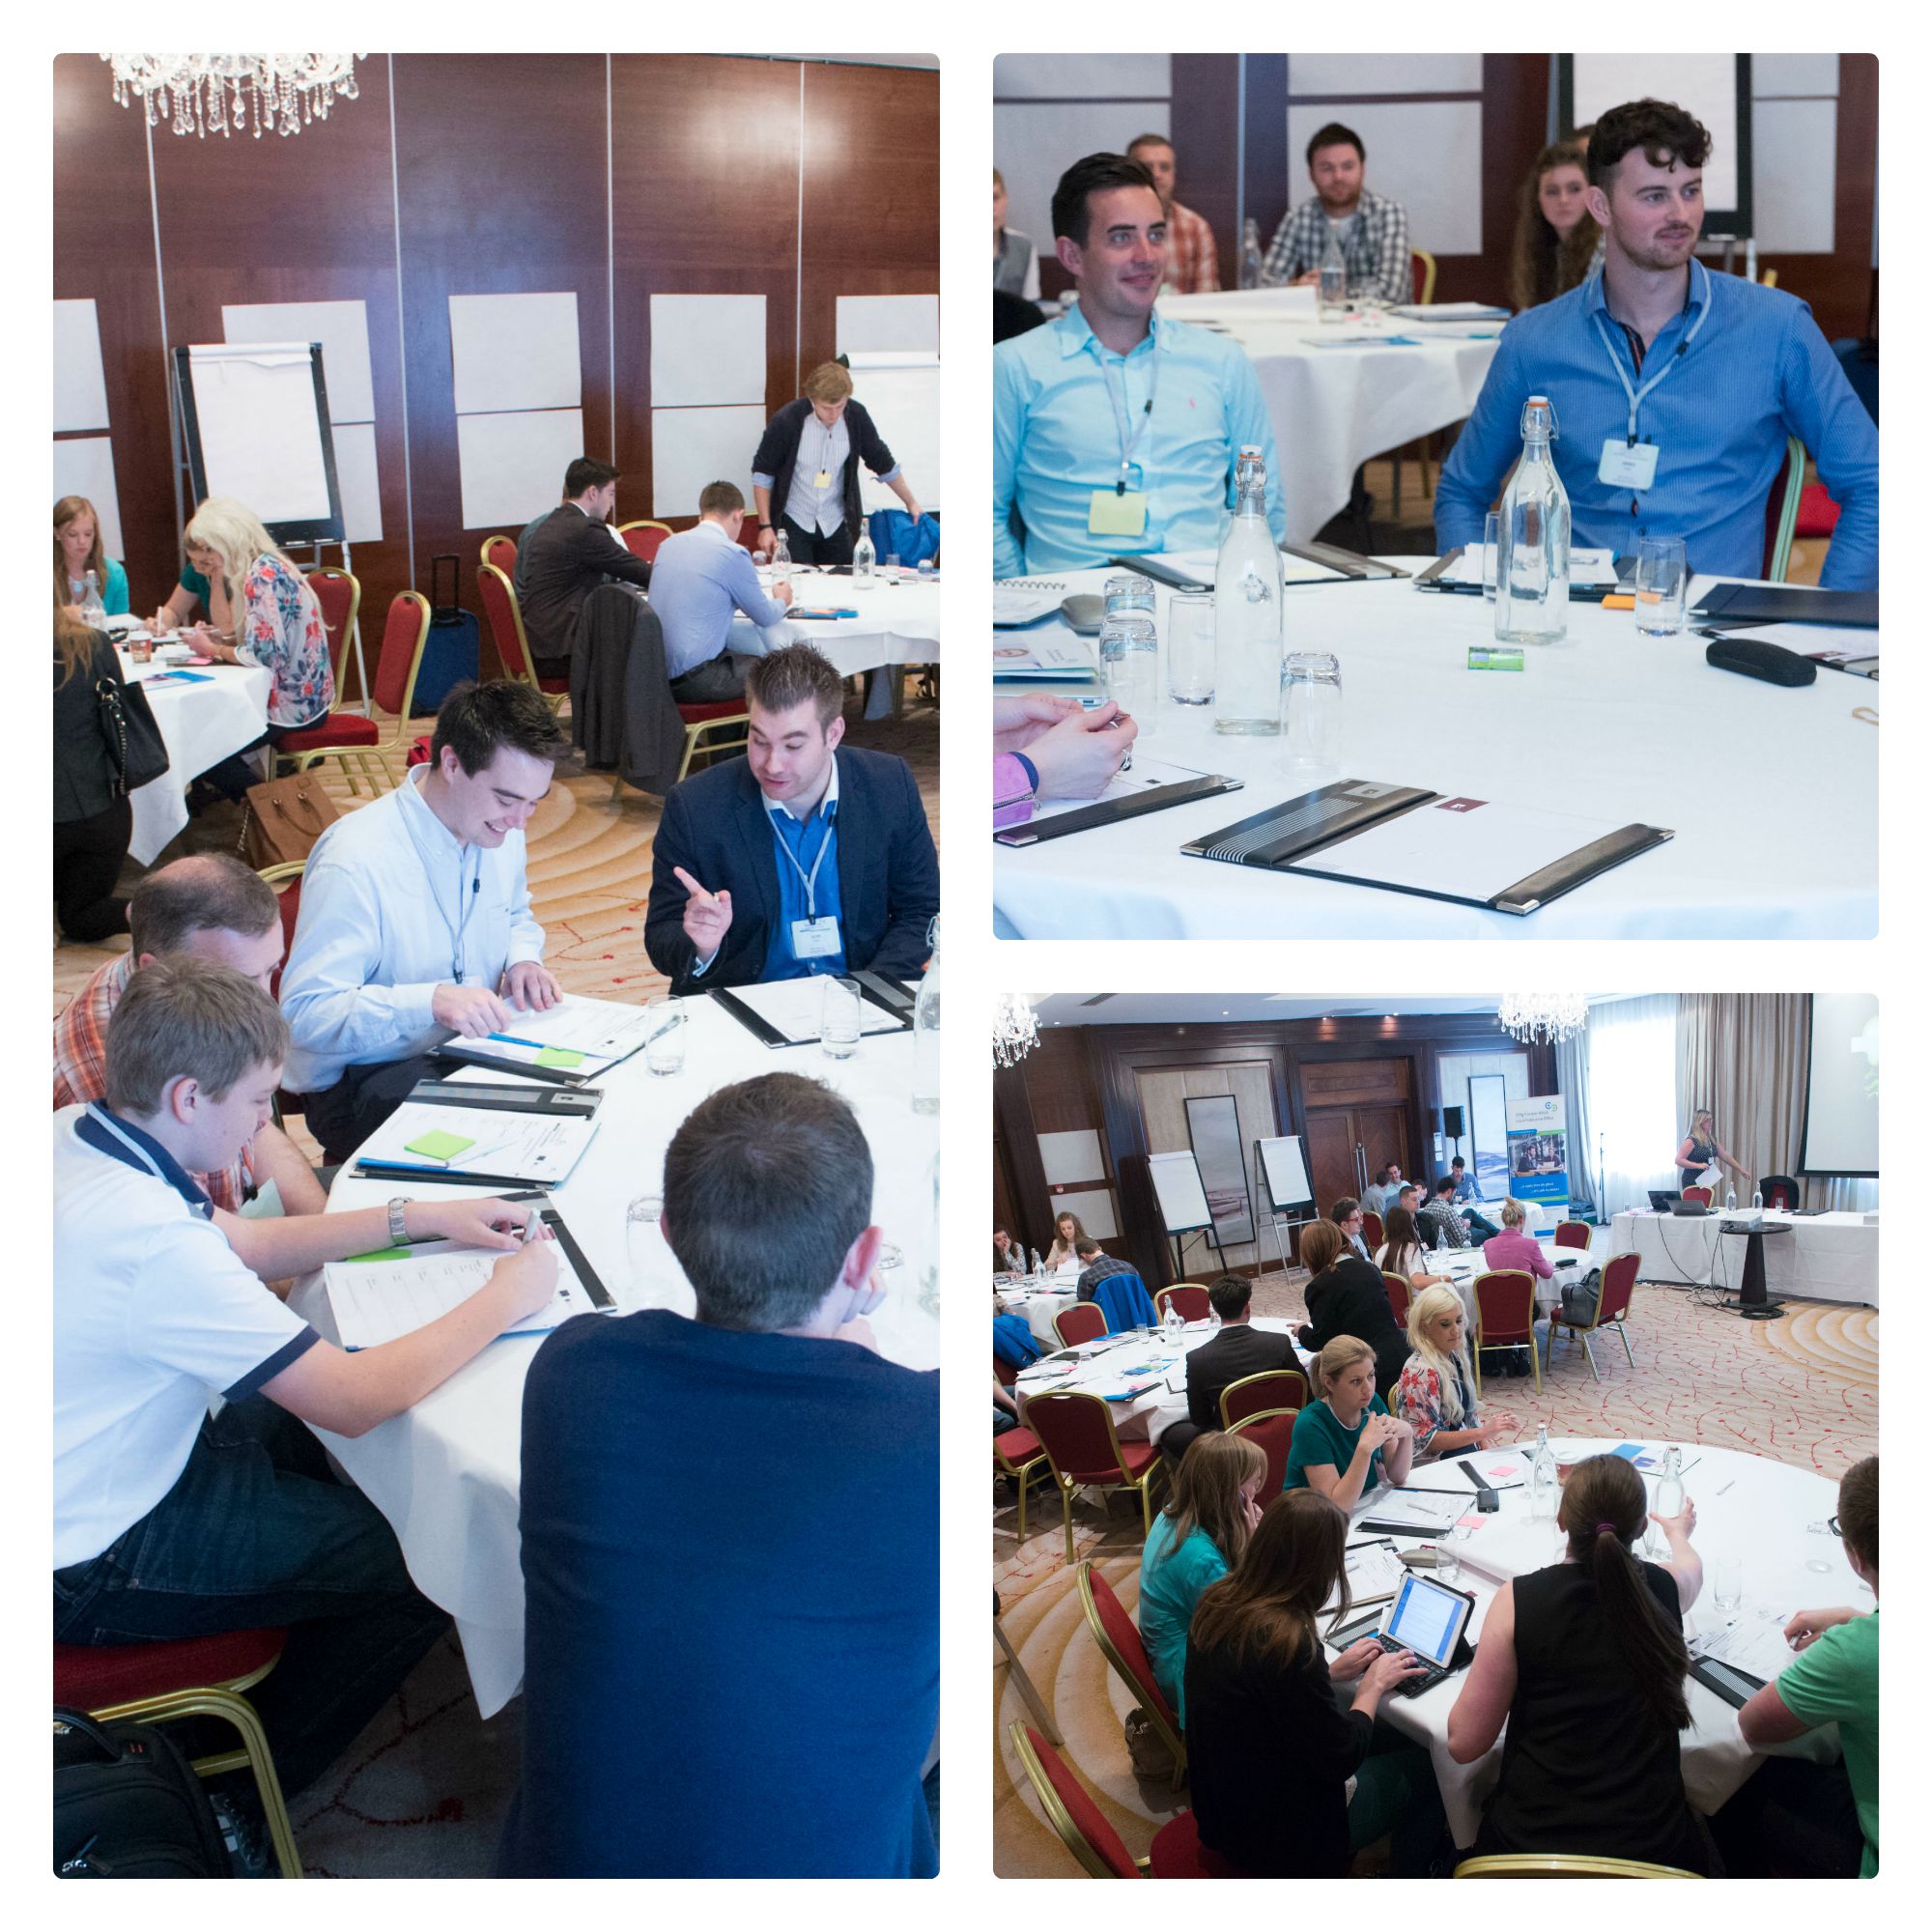 IBYE 2014 bootcamp collage